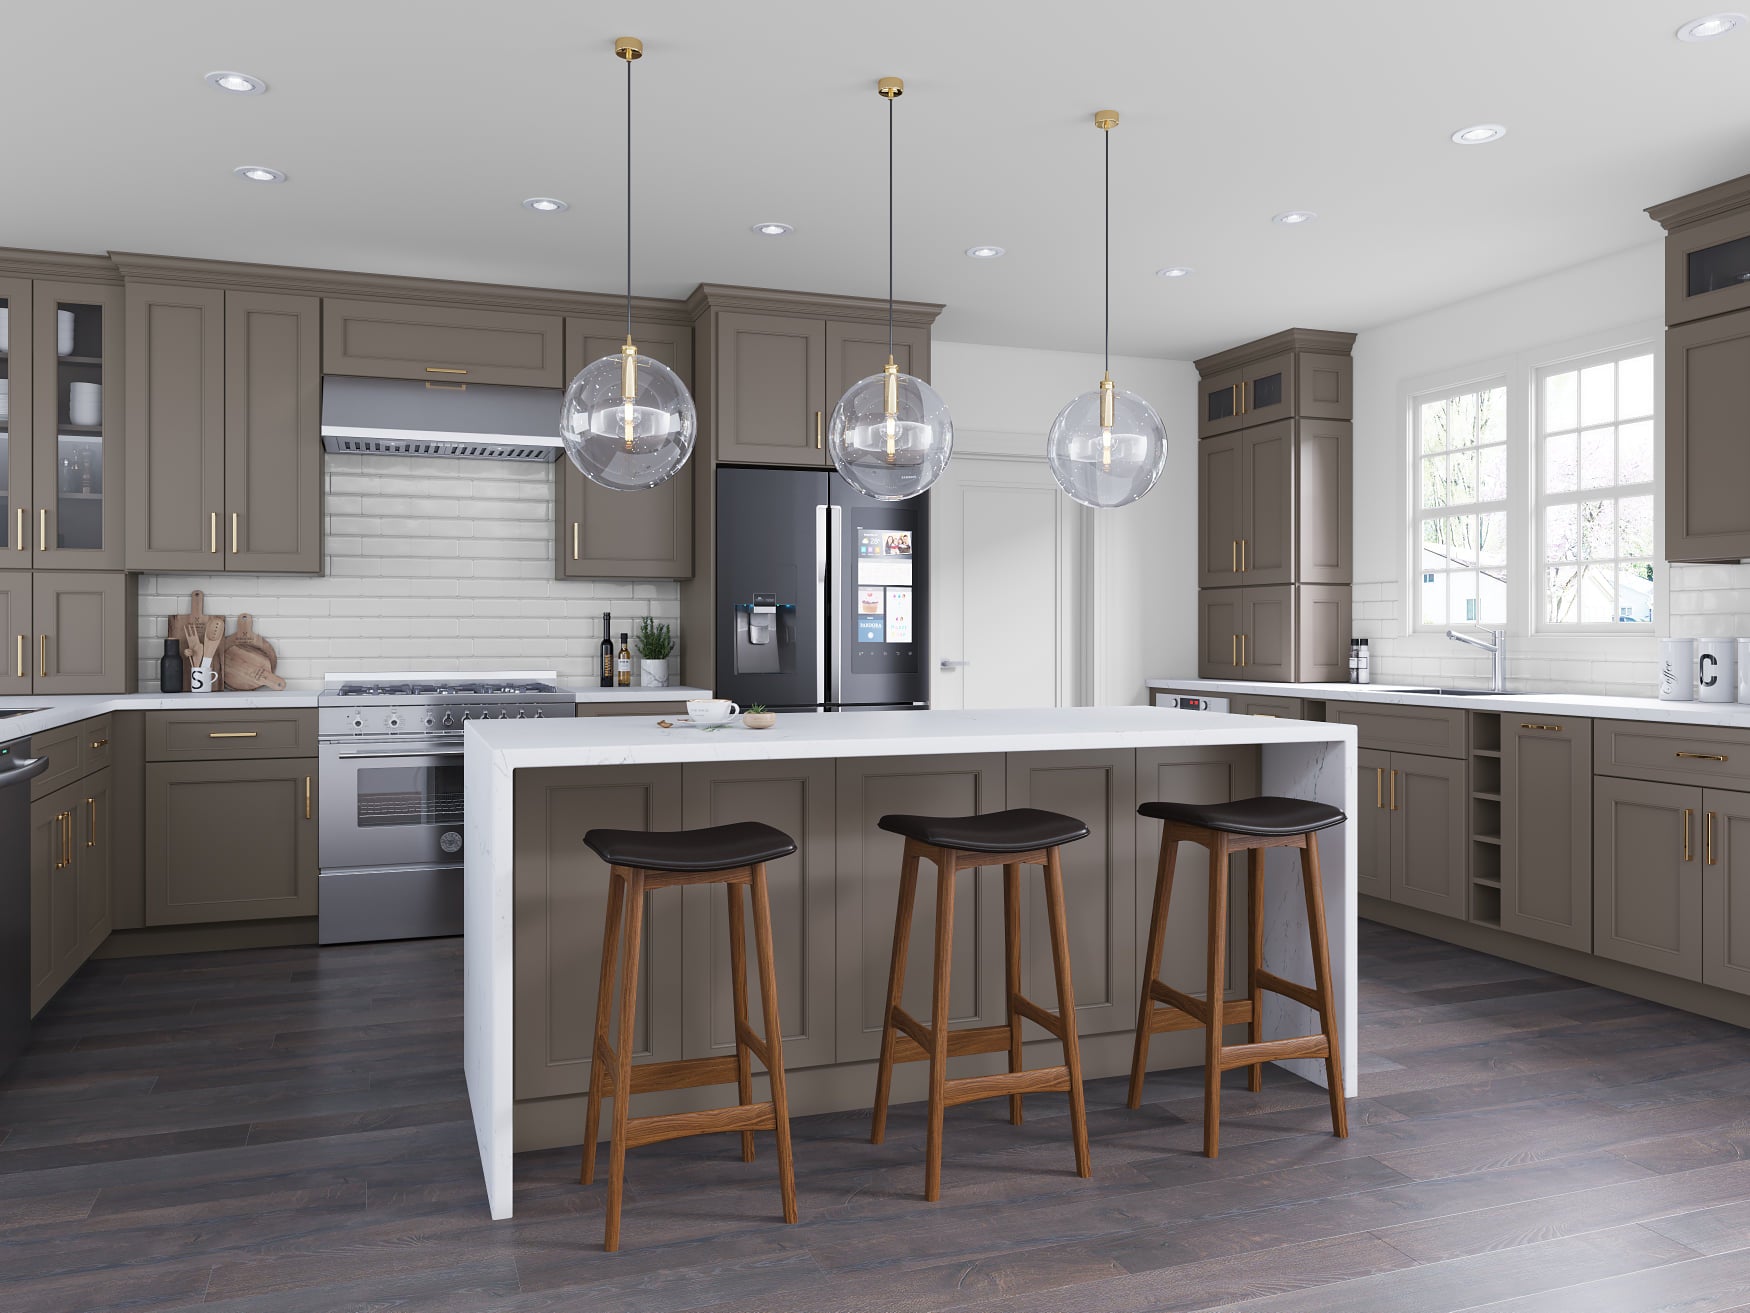 Beige kitchen with island and seating. Pendant kitchen lighting, white countertops